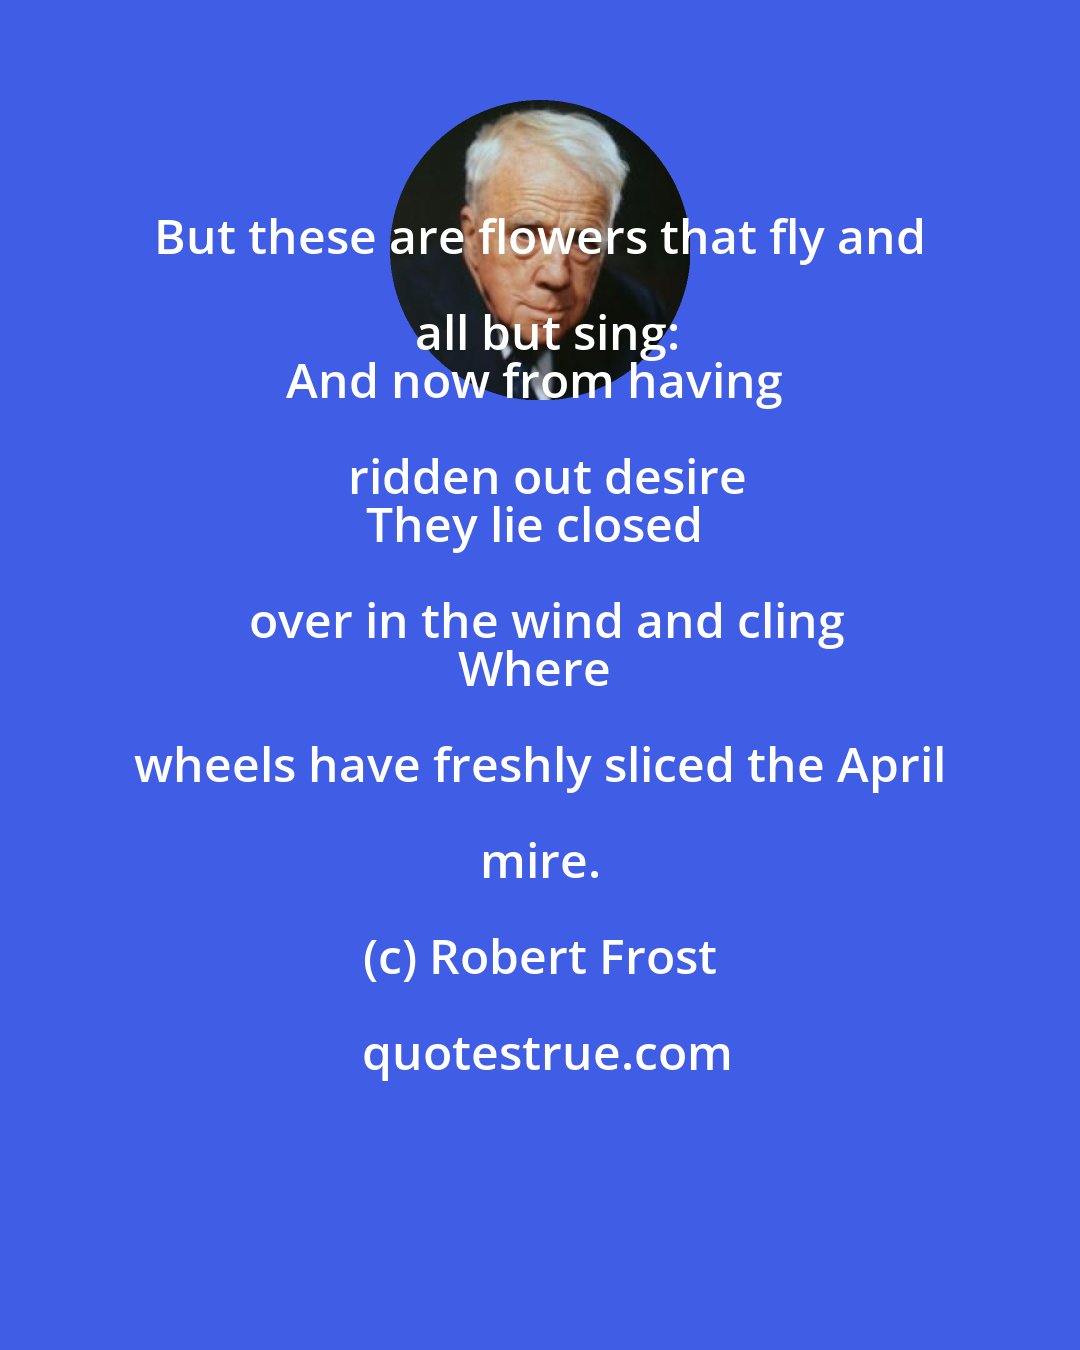 Robert Frost: But these are flowers that fly and all but sing:
And now from having ridden out desire
They lie closed over in the wind and cling
Where wheels have freshly sliced the April mire.